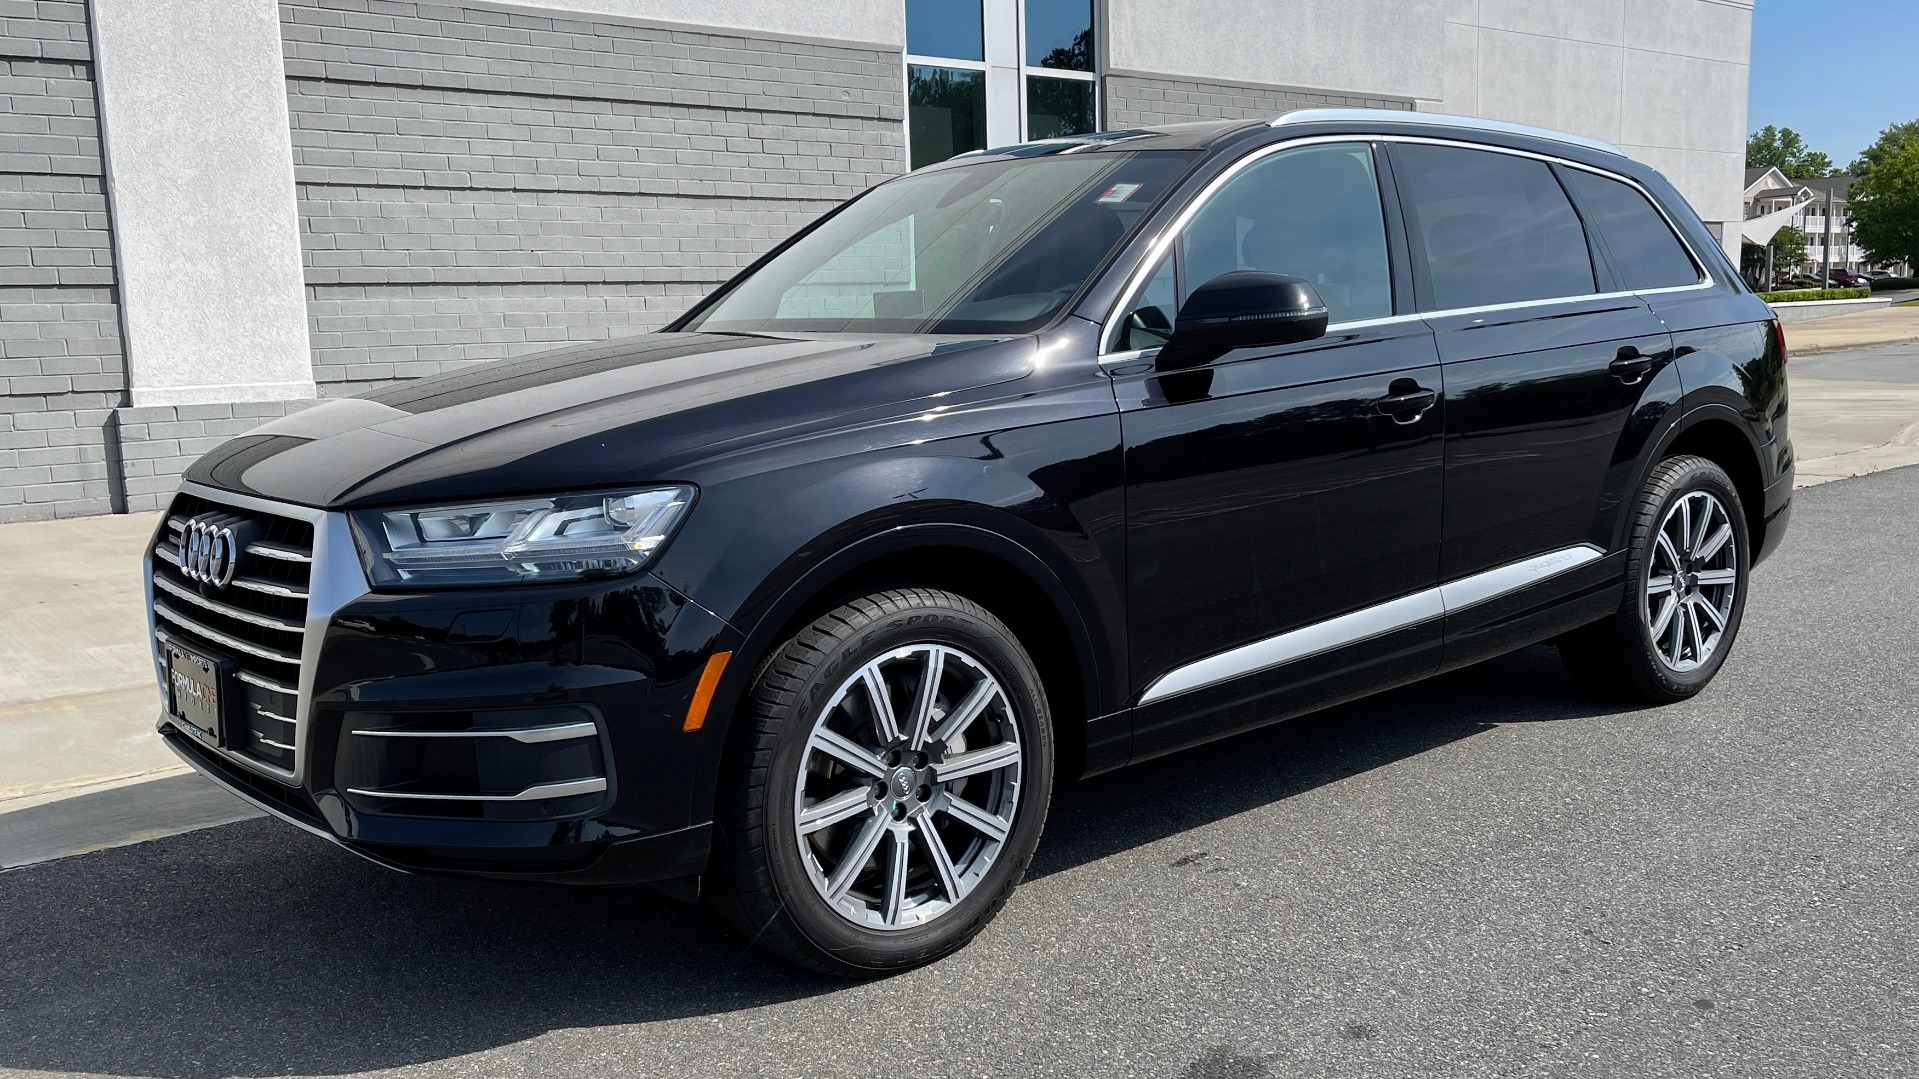 Used 2018 Audi Q7 PREMIUM PLUS / NAV / PANO-ROOF / BOSE / 3-ROW / REARVIEW for sale Sold at Formula Imports in Charlotte NC 28227 3